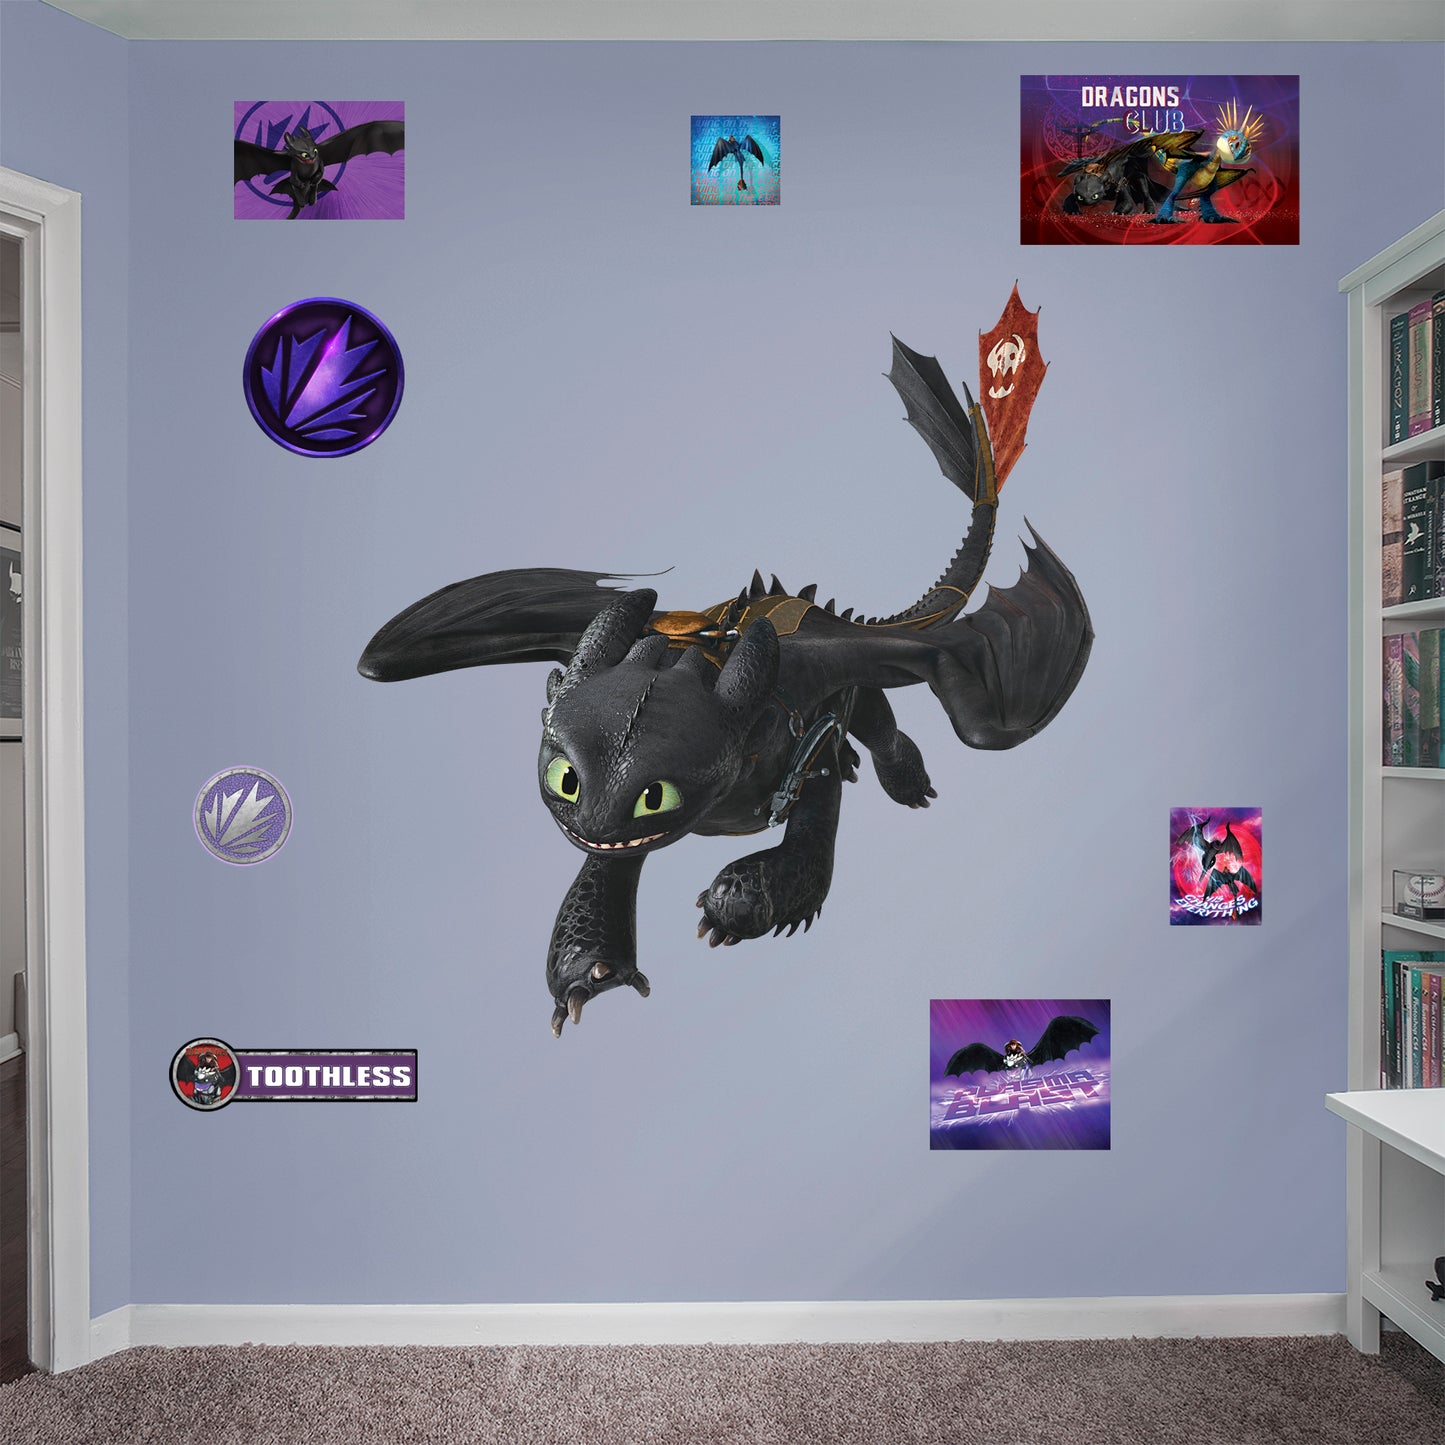 How to Train Your Dragon 3D Wall Decal, Toothless, Hiccup, Wall